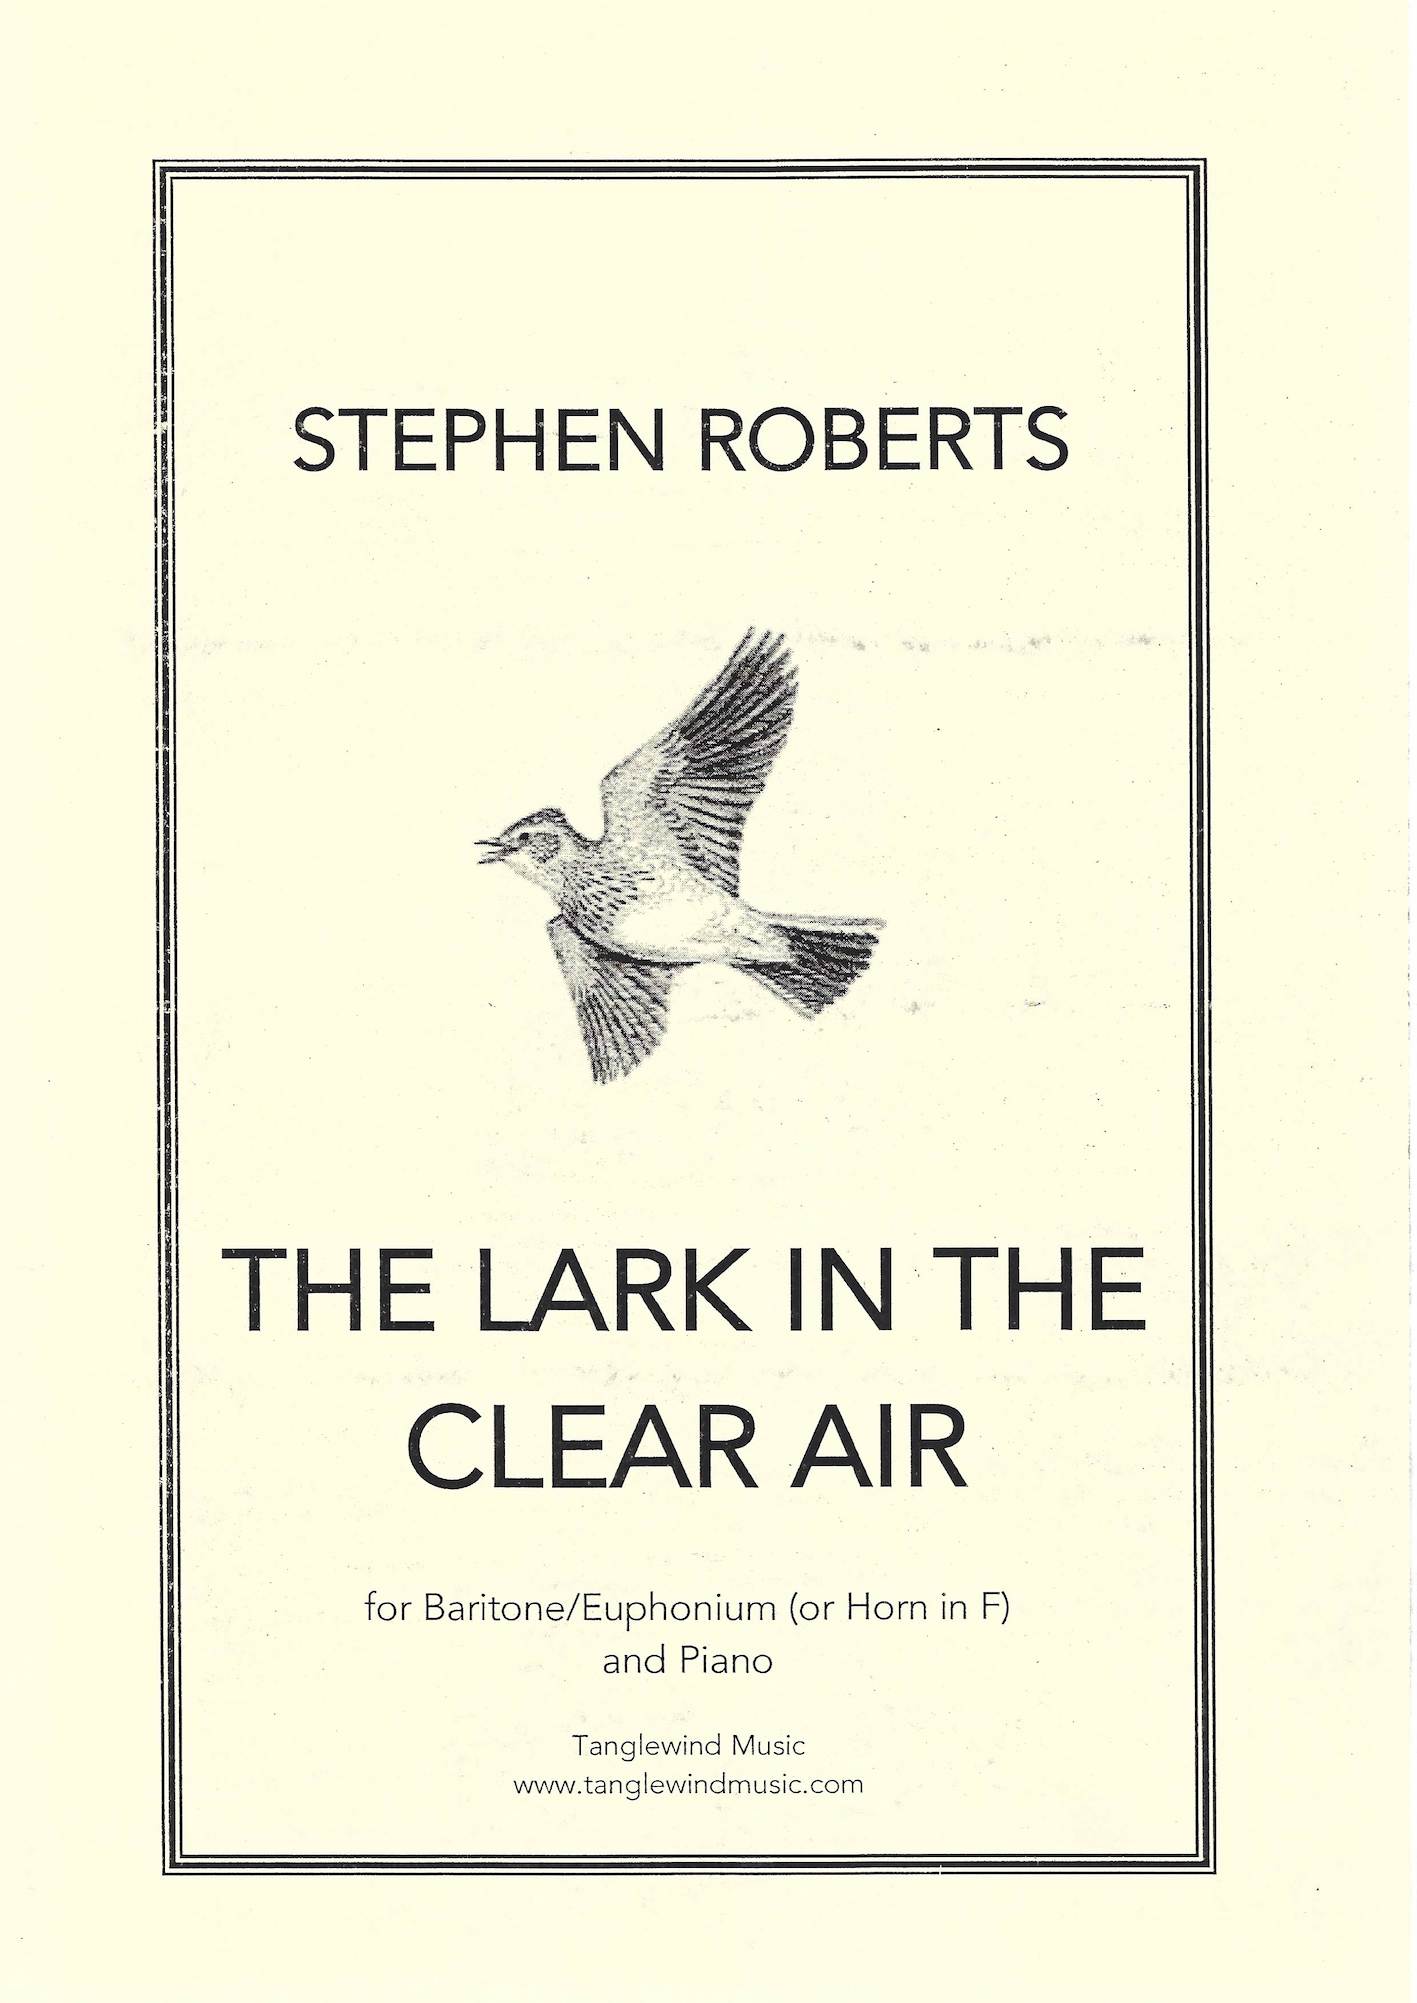 The Lark in the Clear Air - Arr. Stephen Roberts - for Euphonium/Baritone or Horn in F and Piano